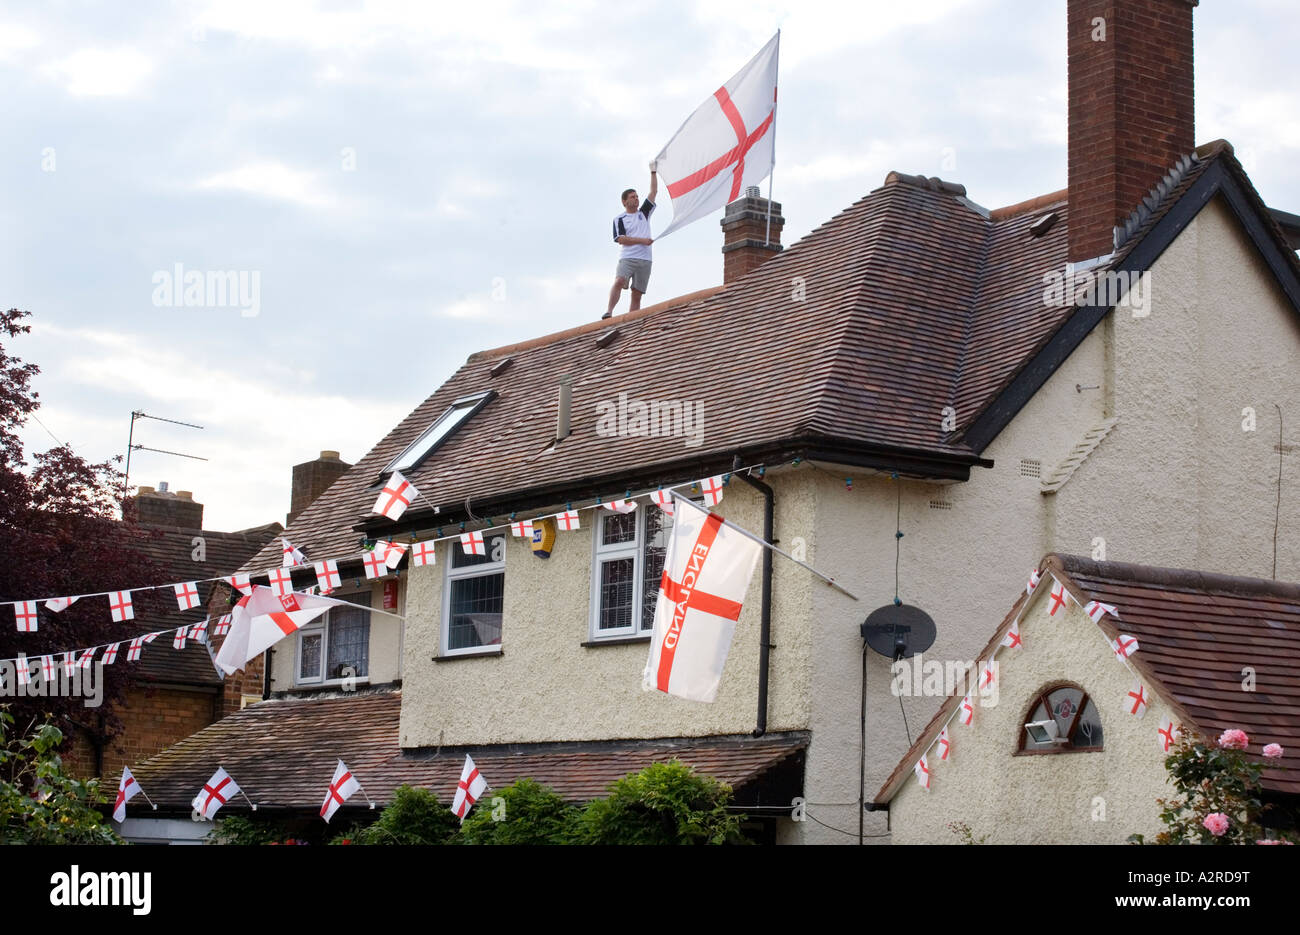 An England football fan shows his support by stringing up patriotic flags outside his house in Redditch Worcestershire UK Stock Photo